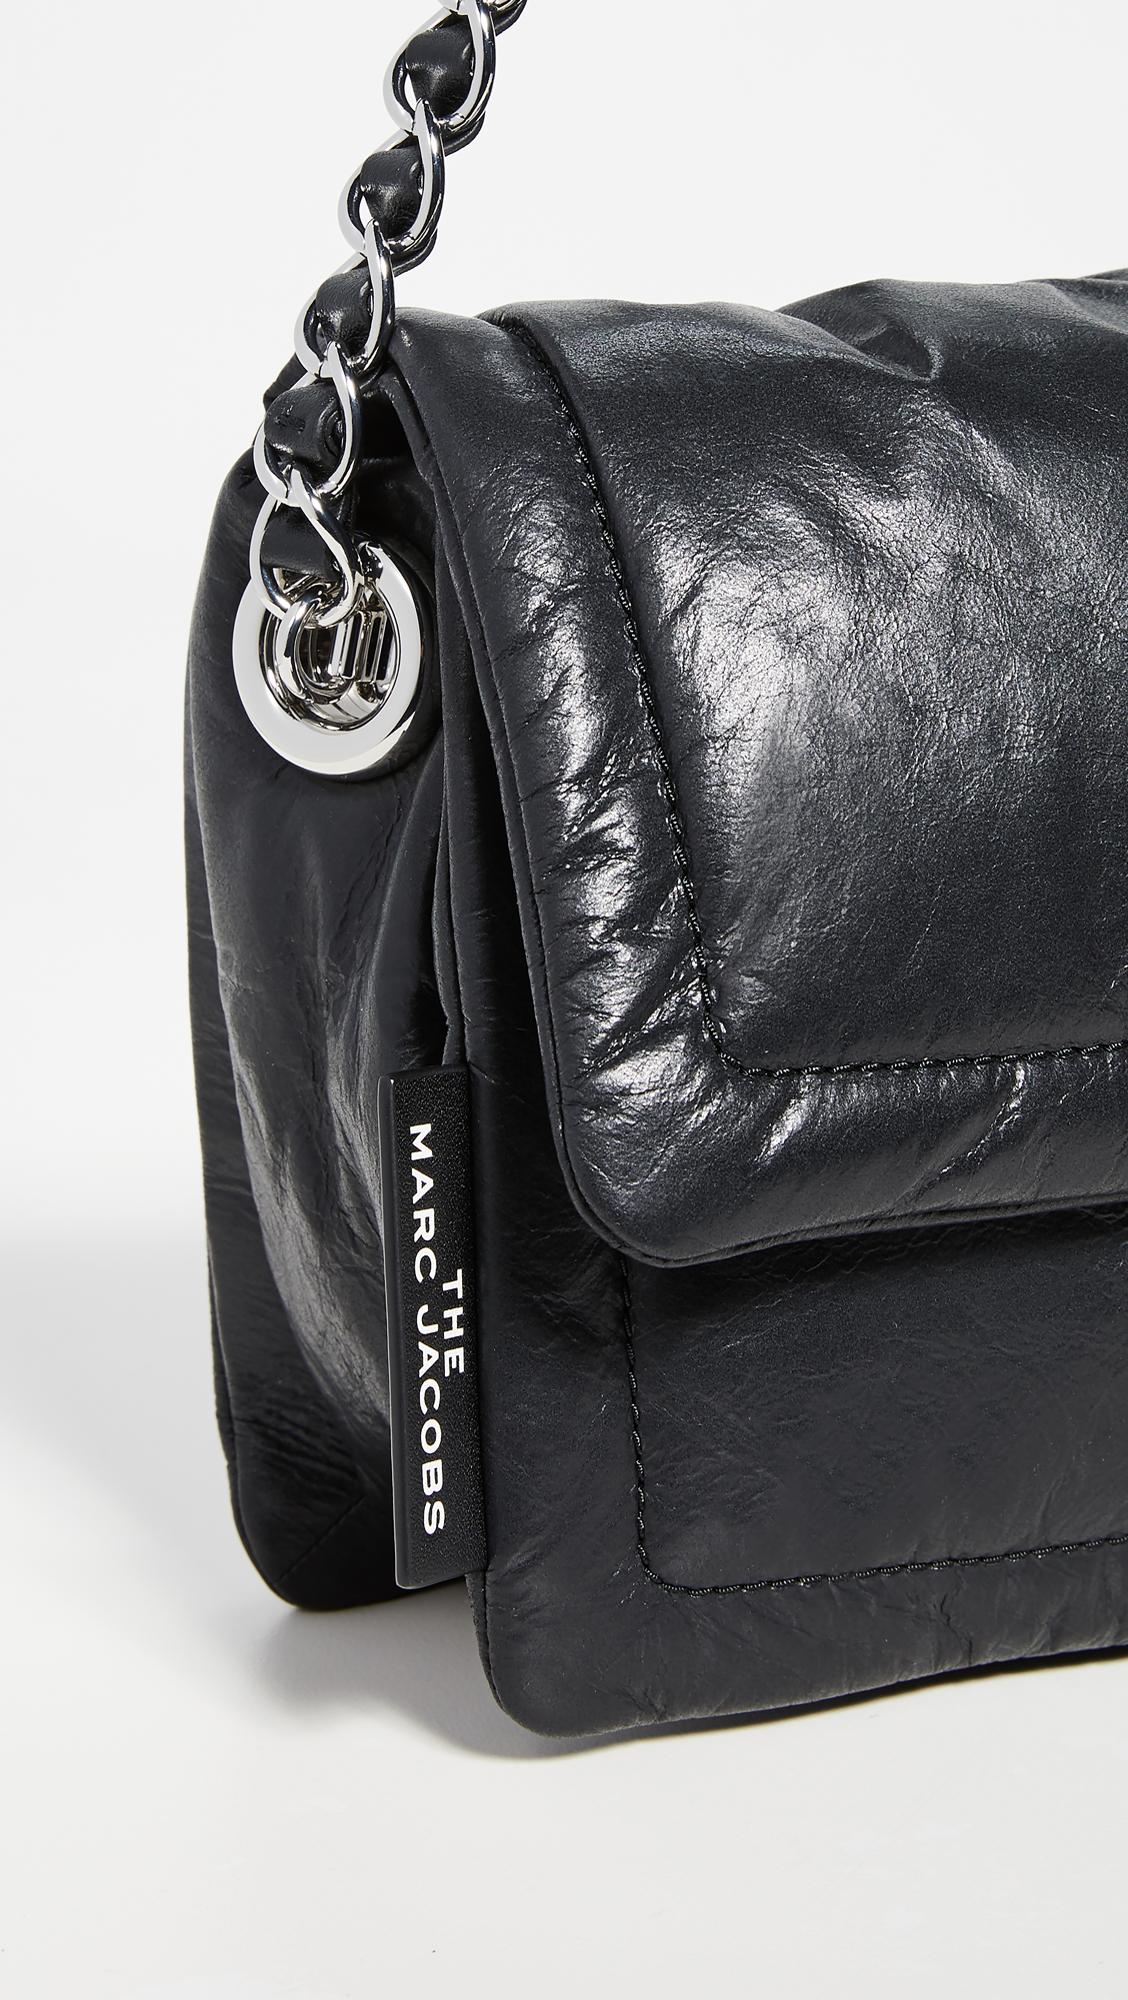 Marc Jacobs Leather The Pillow Bag in Black - Lyst